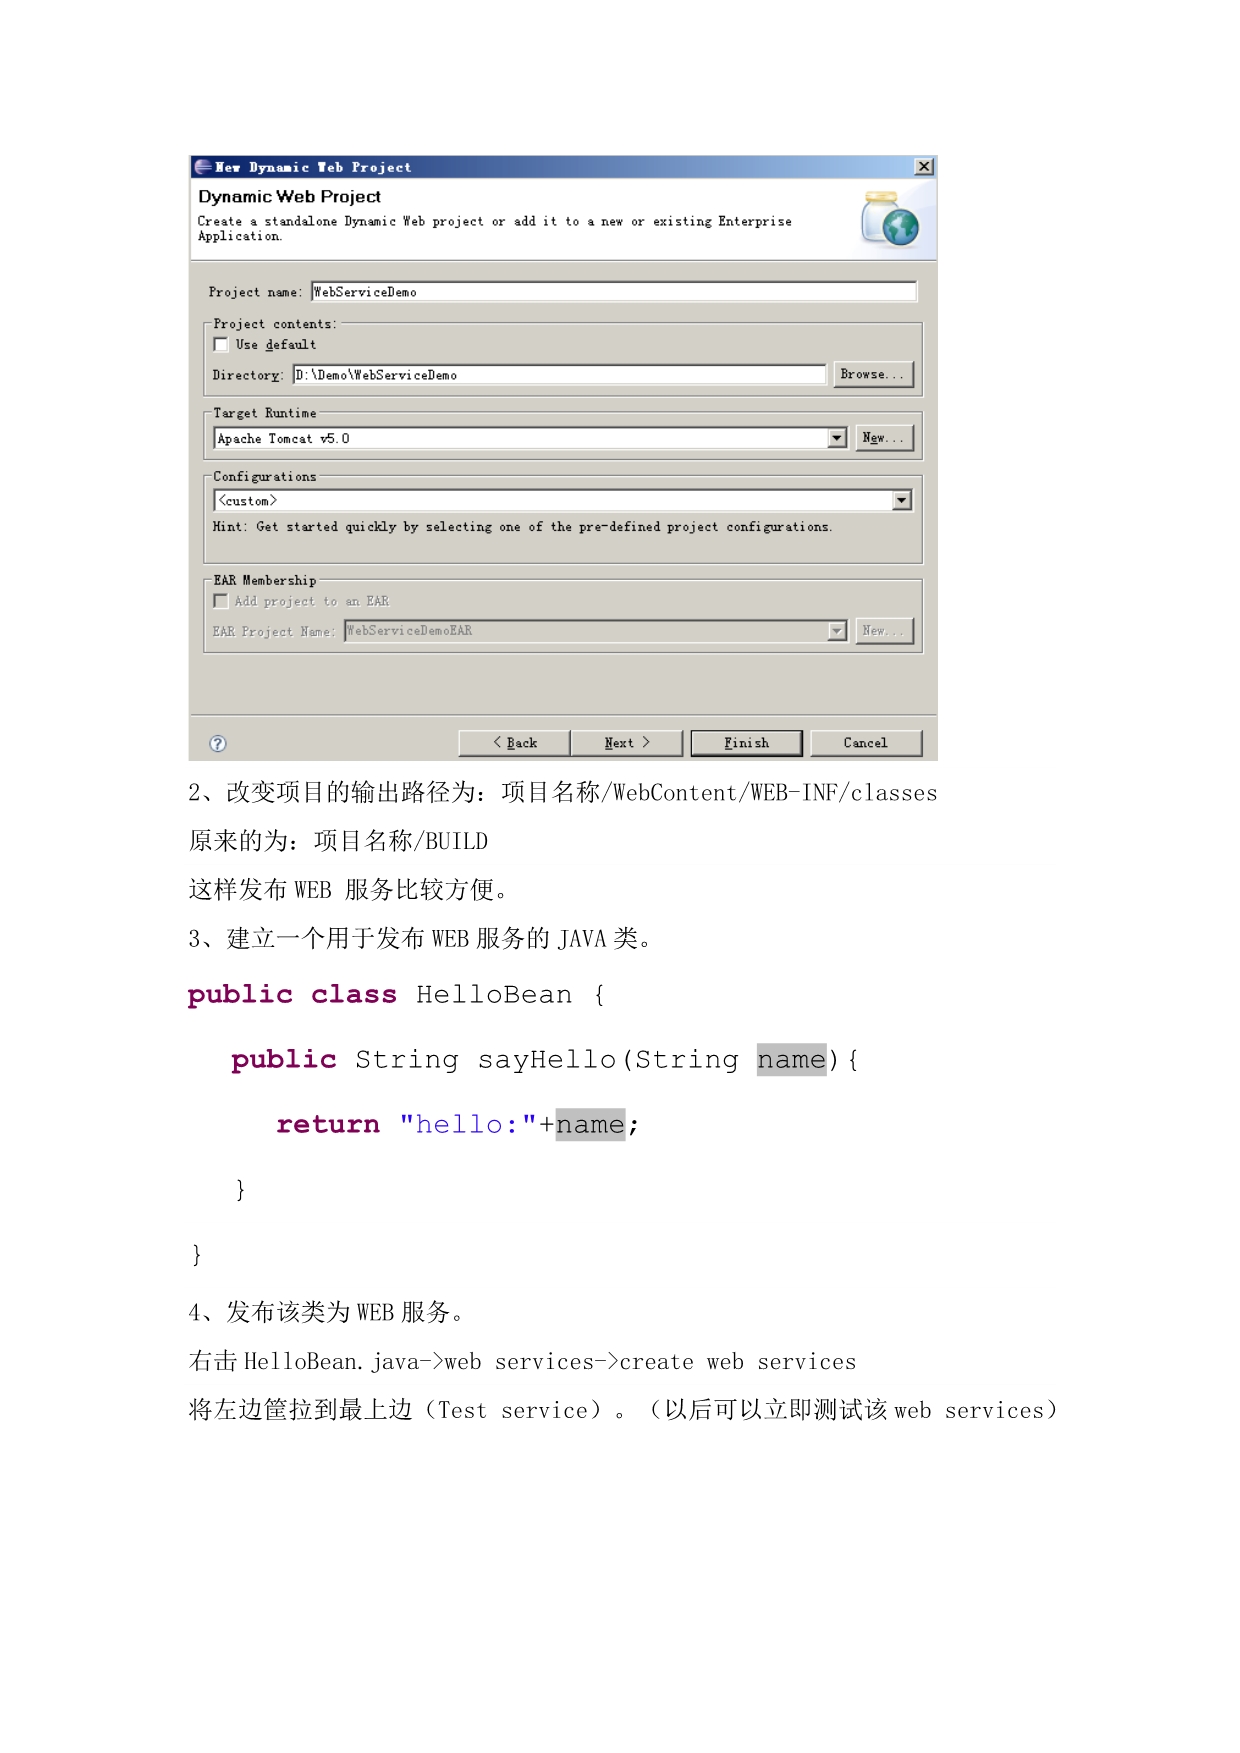 eclipse+AXIS开发webservice_第2页